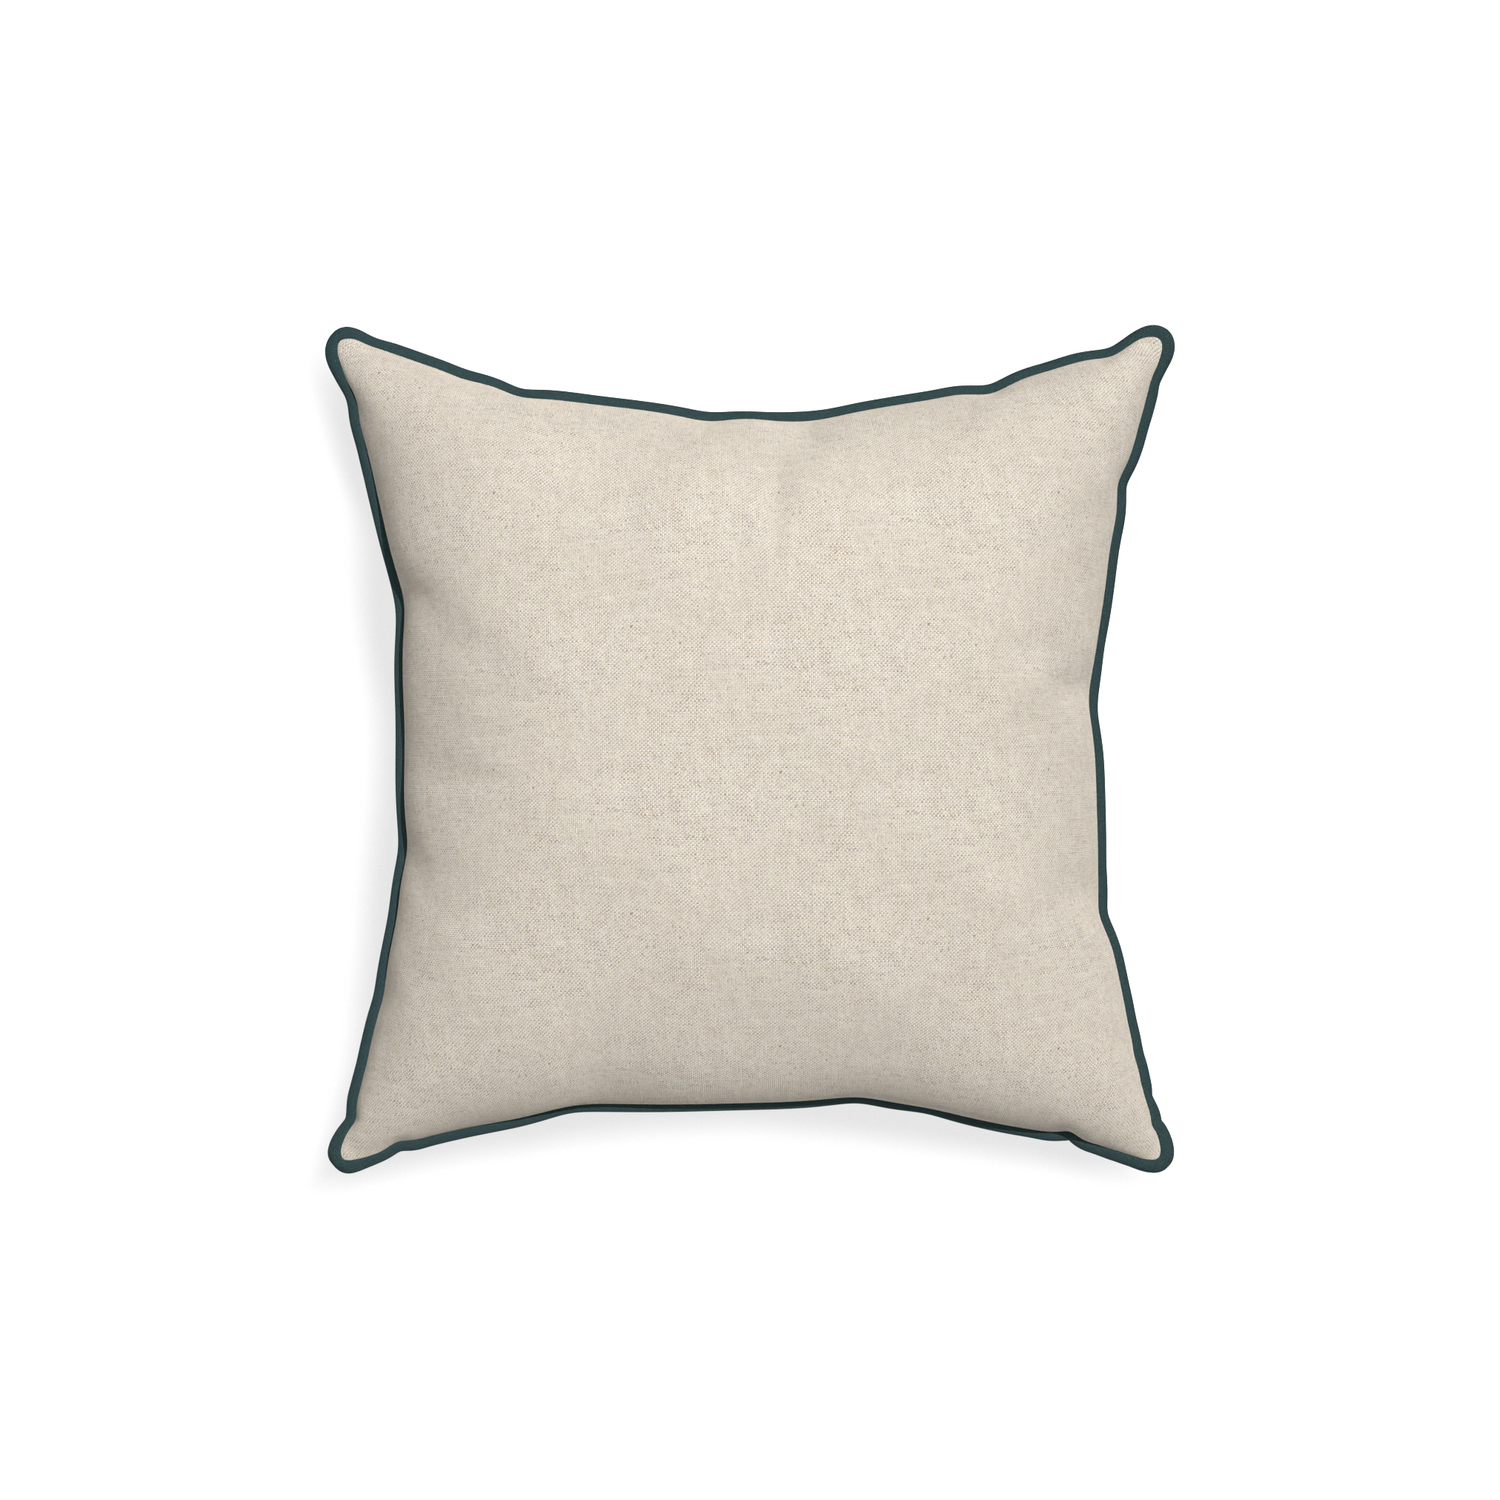 18-square oat custom light brownpillow with p piping on white background